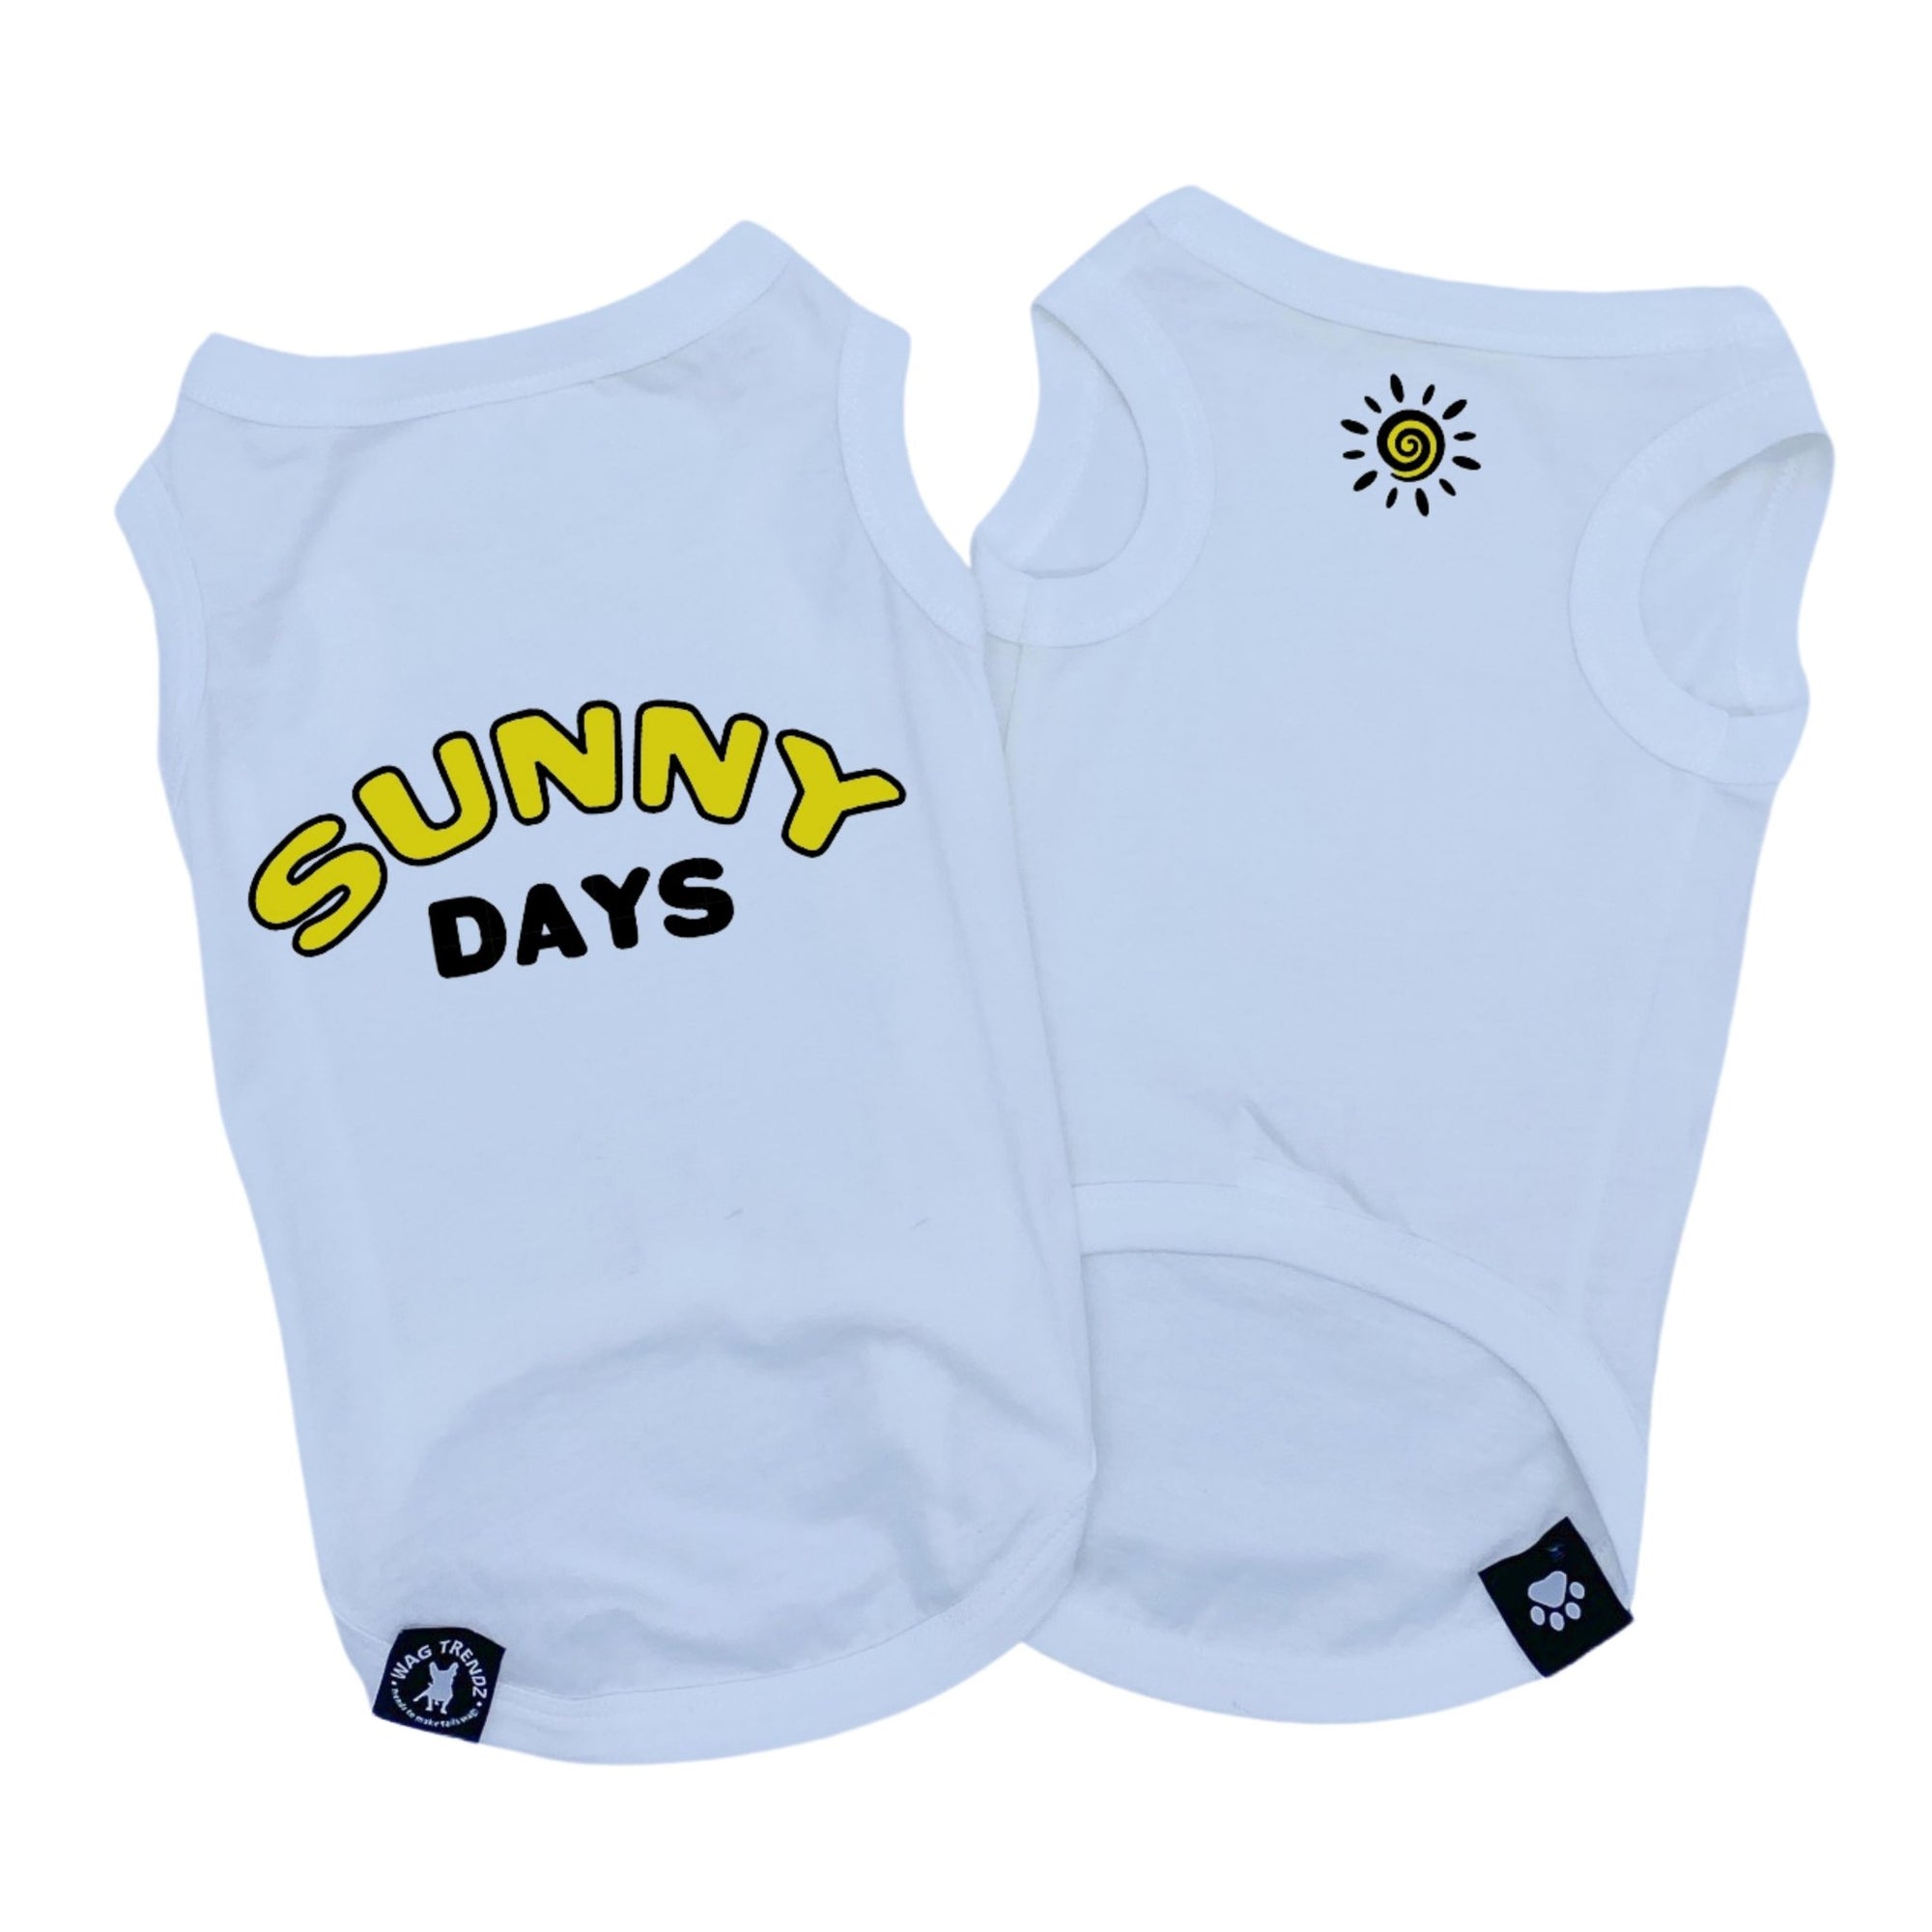 Dog T-Shirt - &quot;Sunny Days&quot; dog t-shirts in White - backside says Sunny Days with a modern sunshine emoji on chest - lettering and emoji is in yellow and black - against solid white background - Wag Trendz